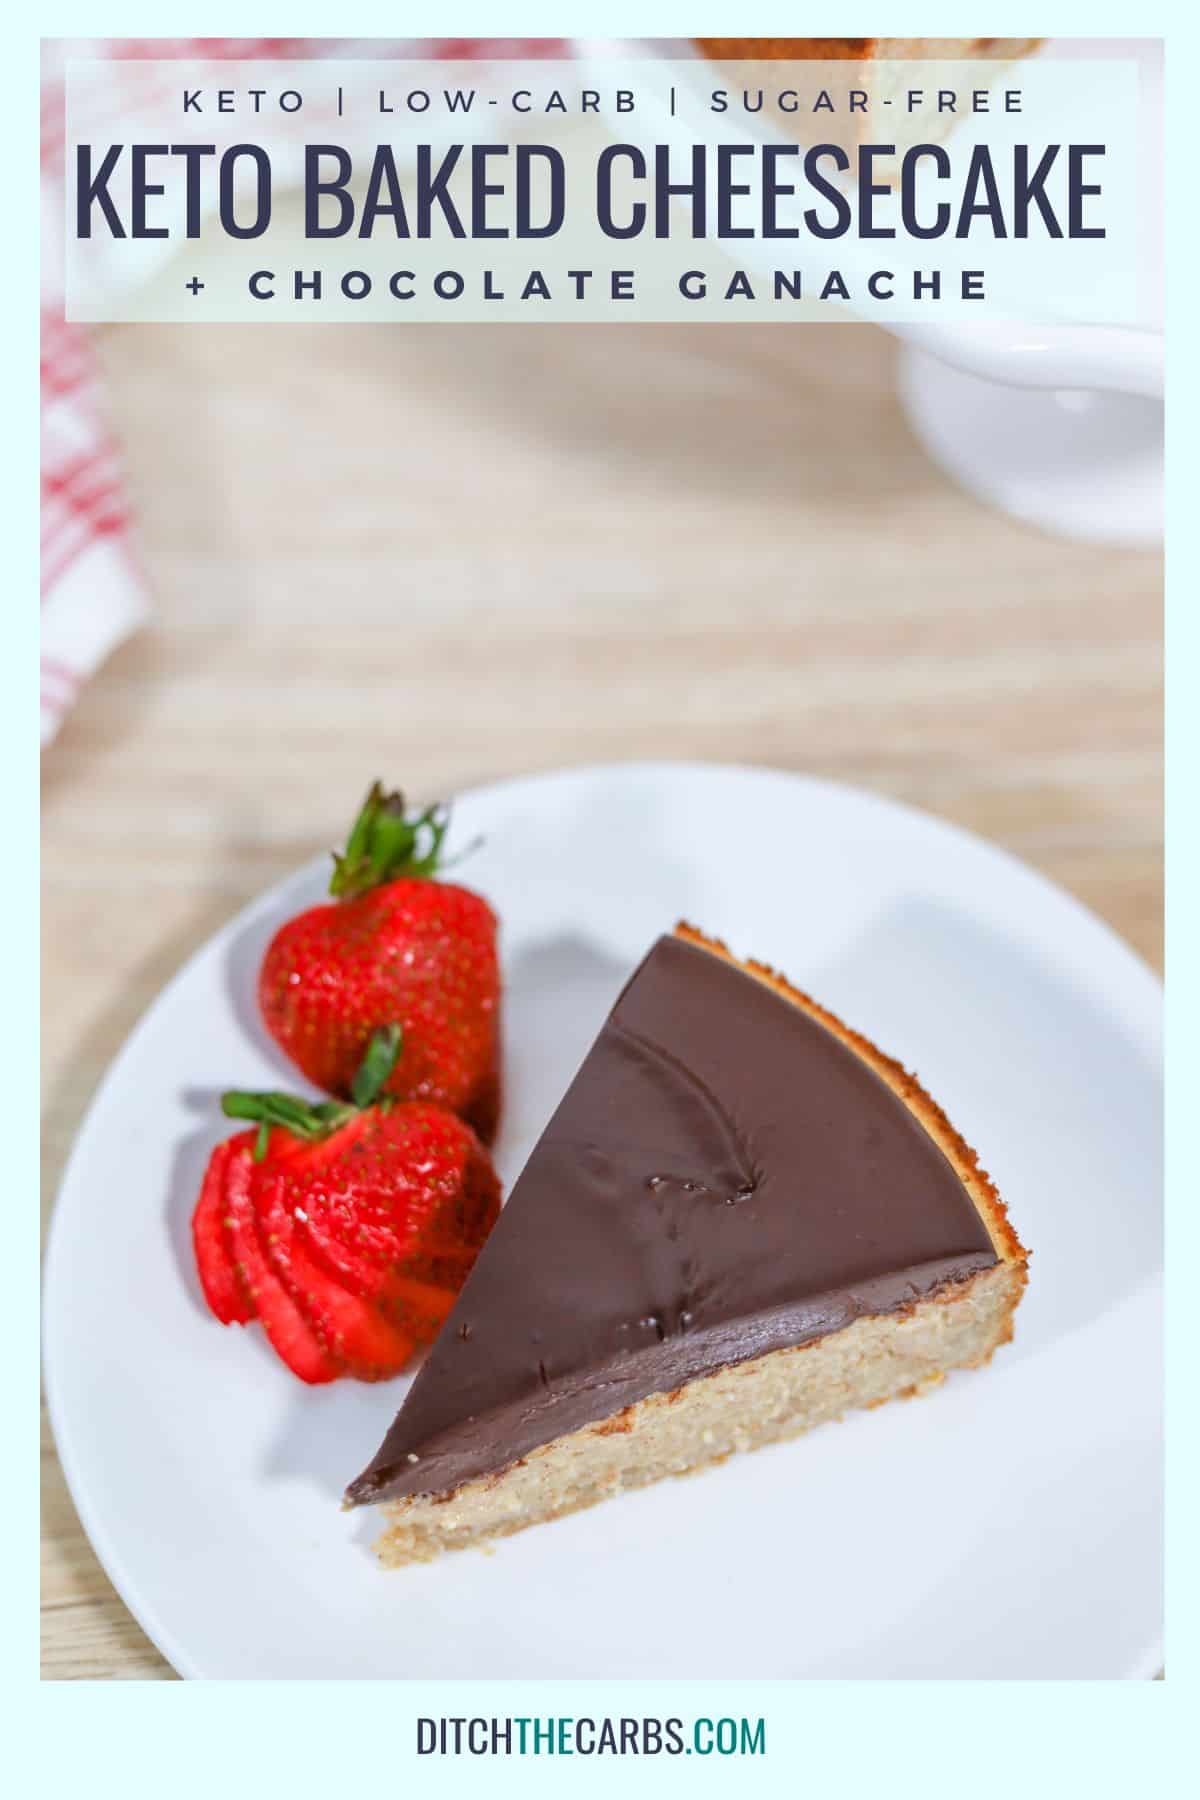 sliced keto cheesecake with chocolate ganache and served with strawberries